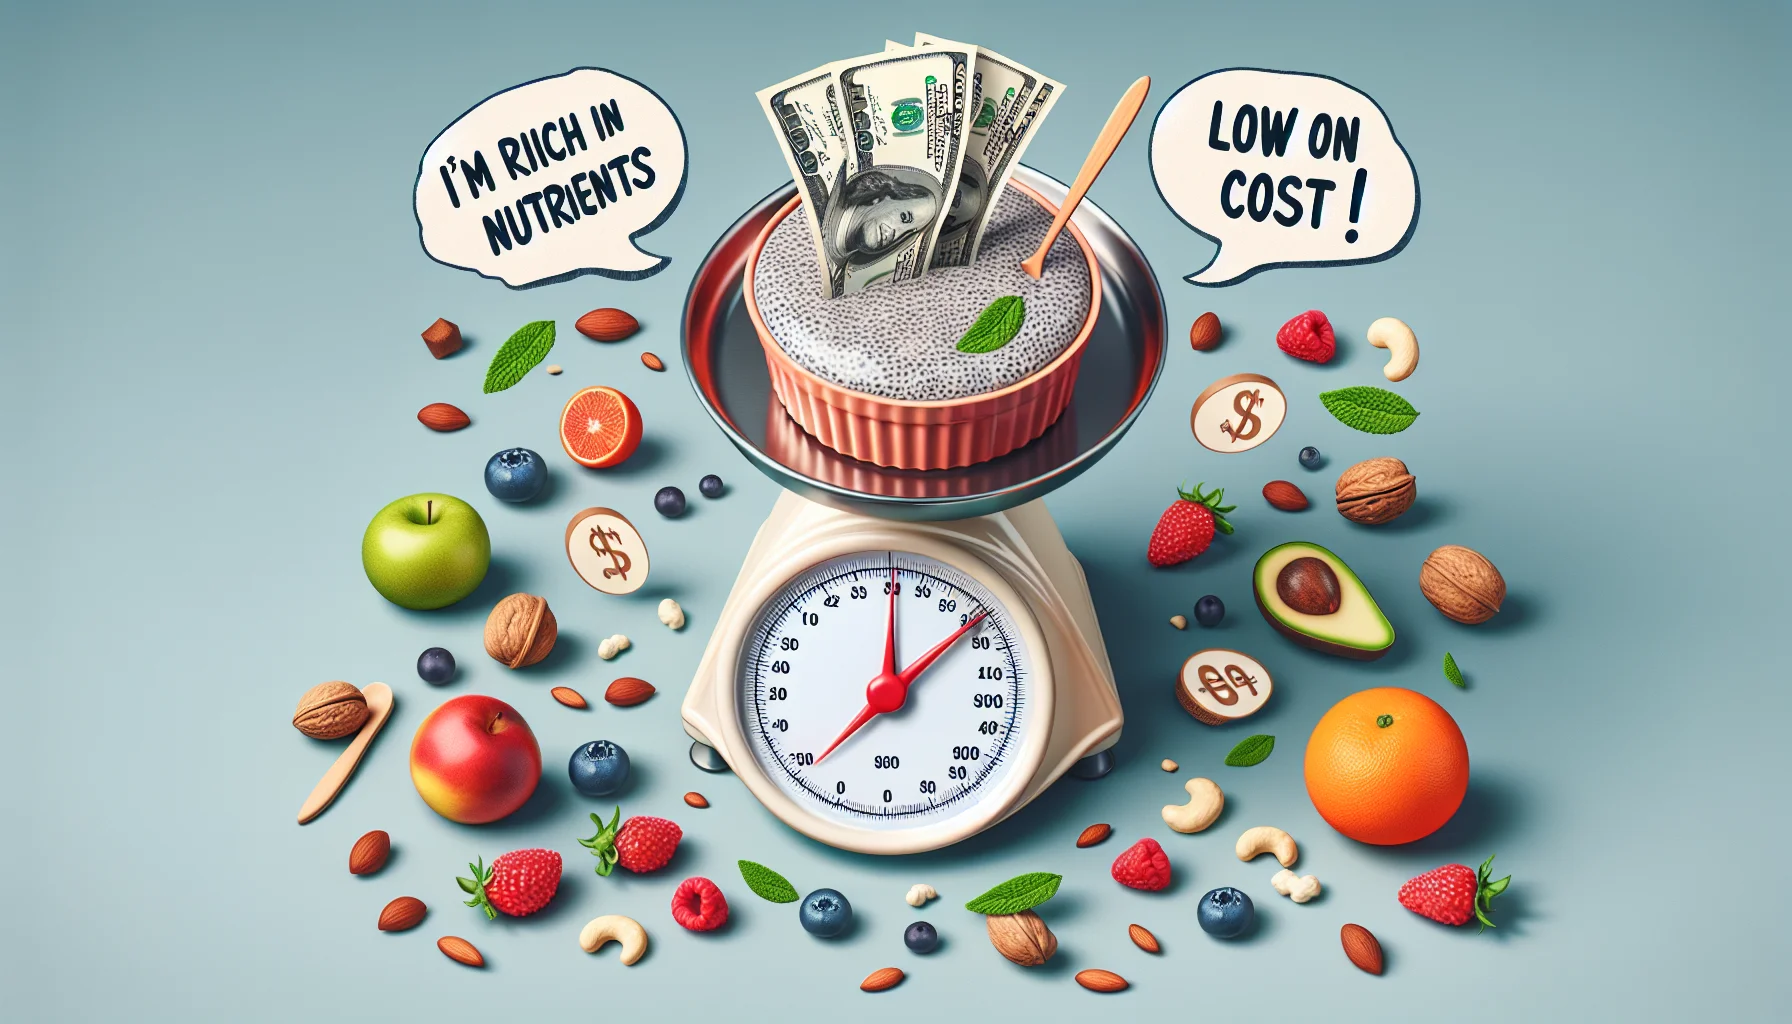 Create a humorous, yet realistic image where a bowl of chia pudding is being measured on a traditional scale with a dollar bill on the other side. The scale is tilted heavily towards the chia pudding side, indicating it is loaded with nutrients and yet lite on the wallet. Surrounding the scale are various fruits and nuts indicating healthy toppings. Floating cartoonish numbers, reminiscent of caloric values, are coming out from the bowl, painting a picture of high nutrient value. A speech bubble coming from the chia pudding says, 'I'm rich in nutrients and low on cost!'